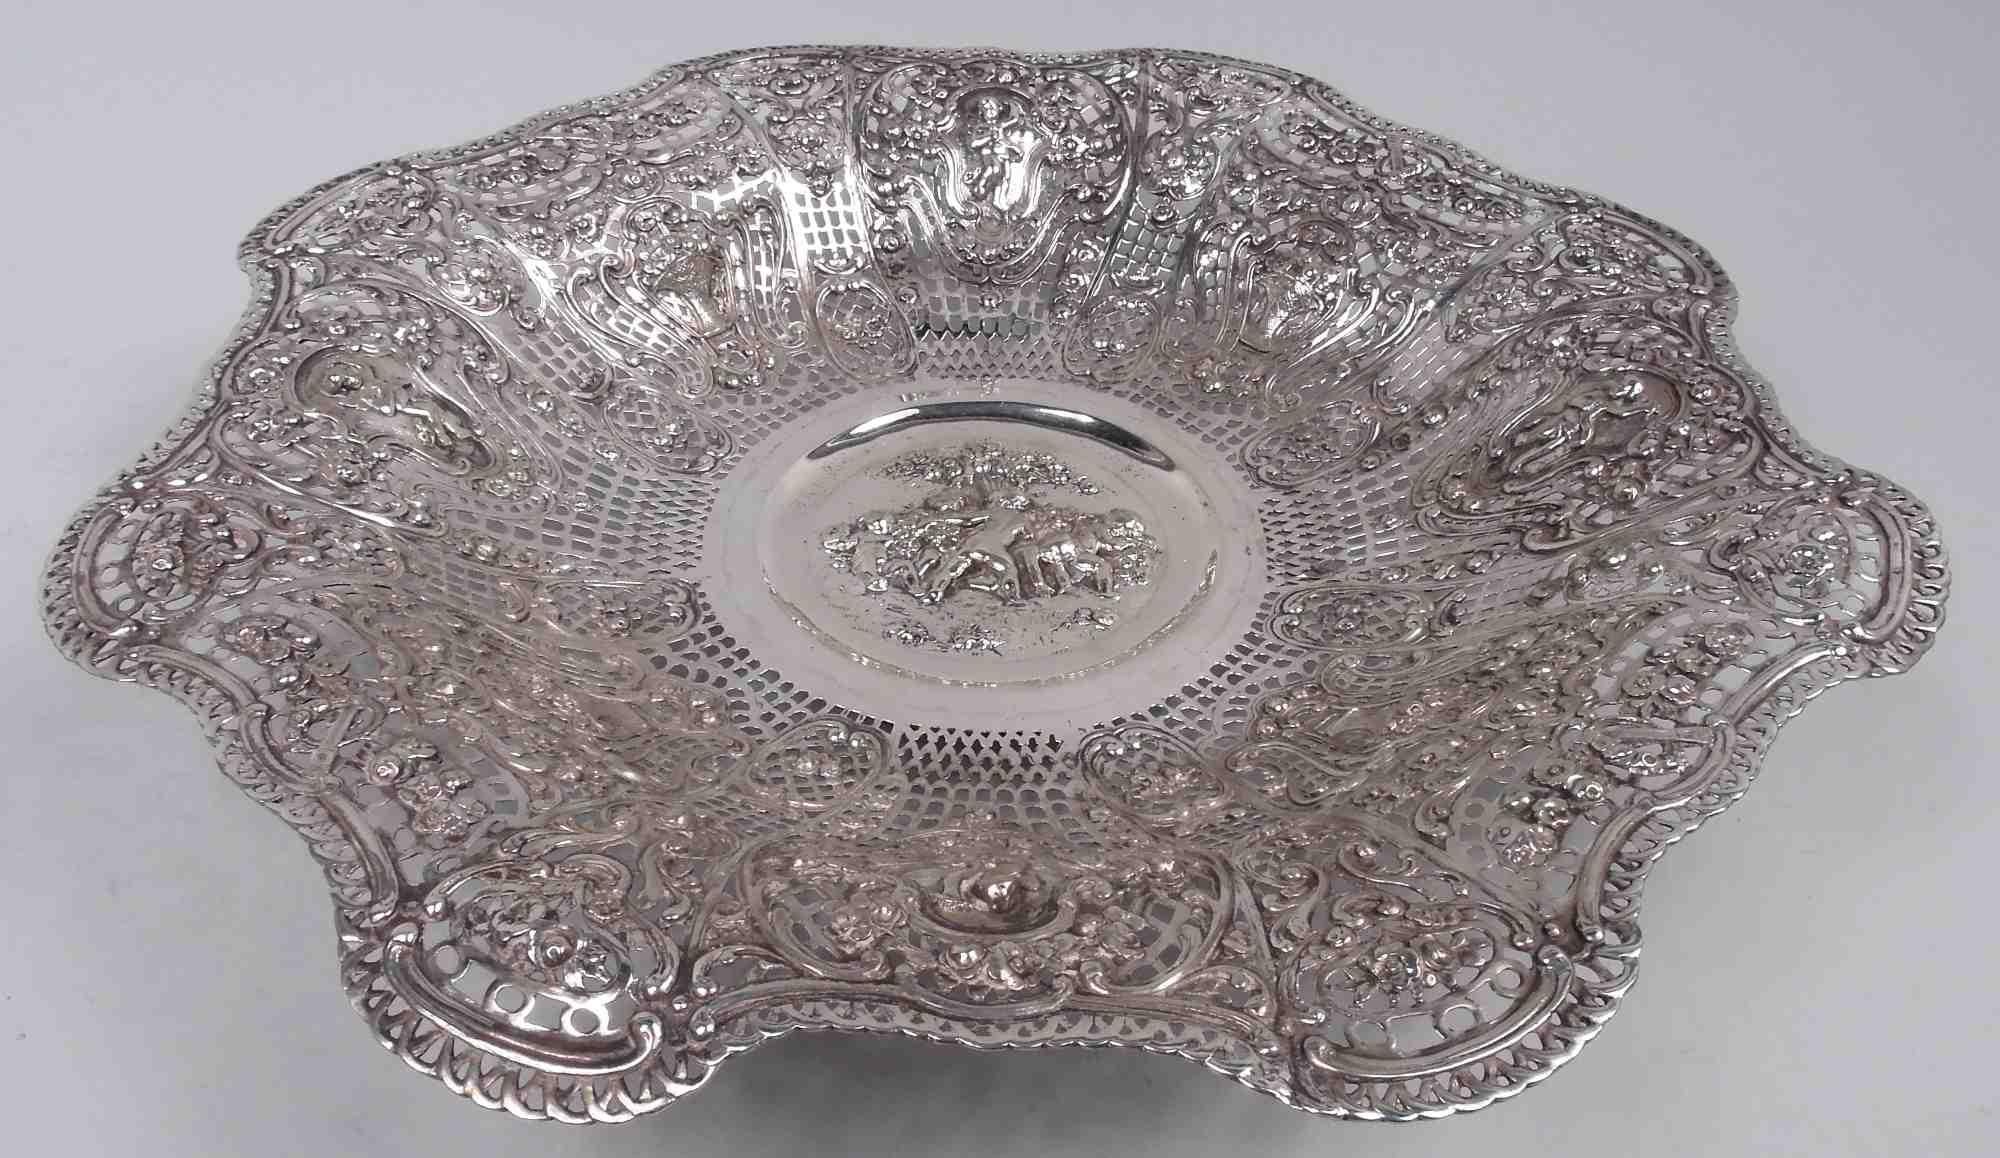 German Rococo 830 silver bowl, ca 1900. Round well with rosebud-gathering cherubs in relief. Sides tapering with scrolled and wavy rim. Heraldic shields with more cherubs and flower baskets as well as flower-strewn scrolled frames on pierced ground.